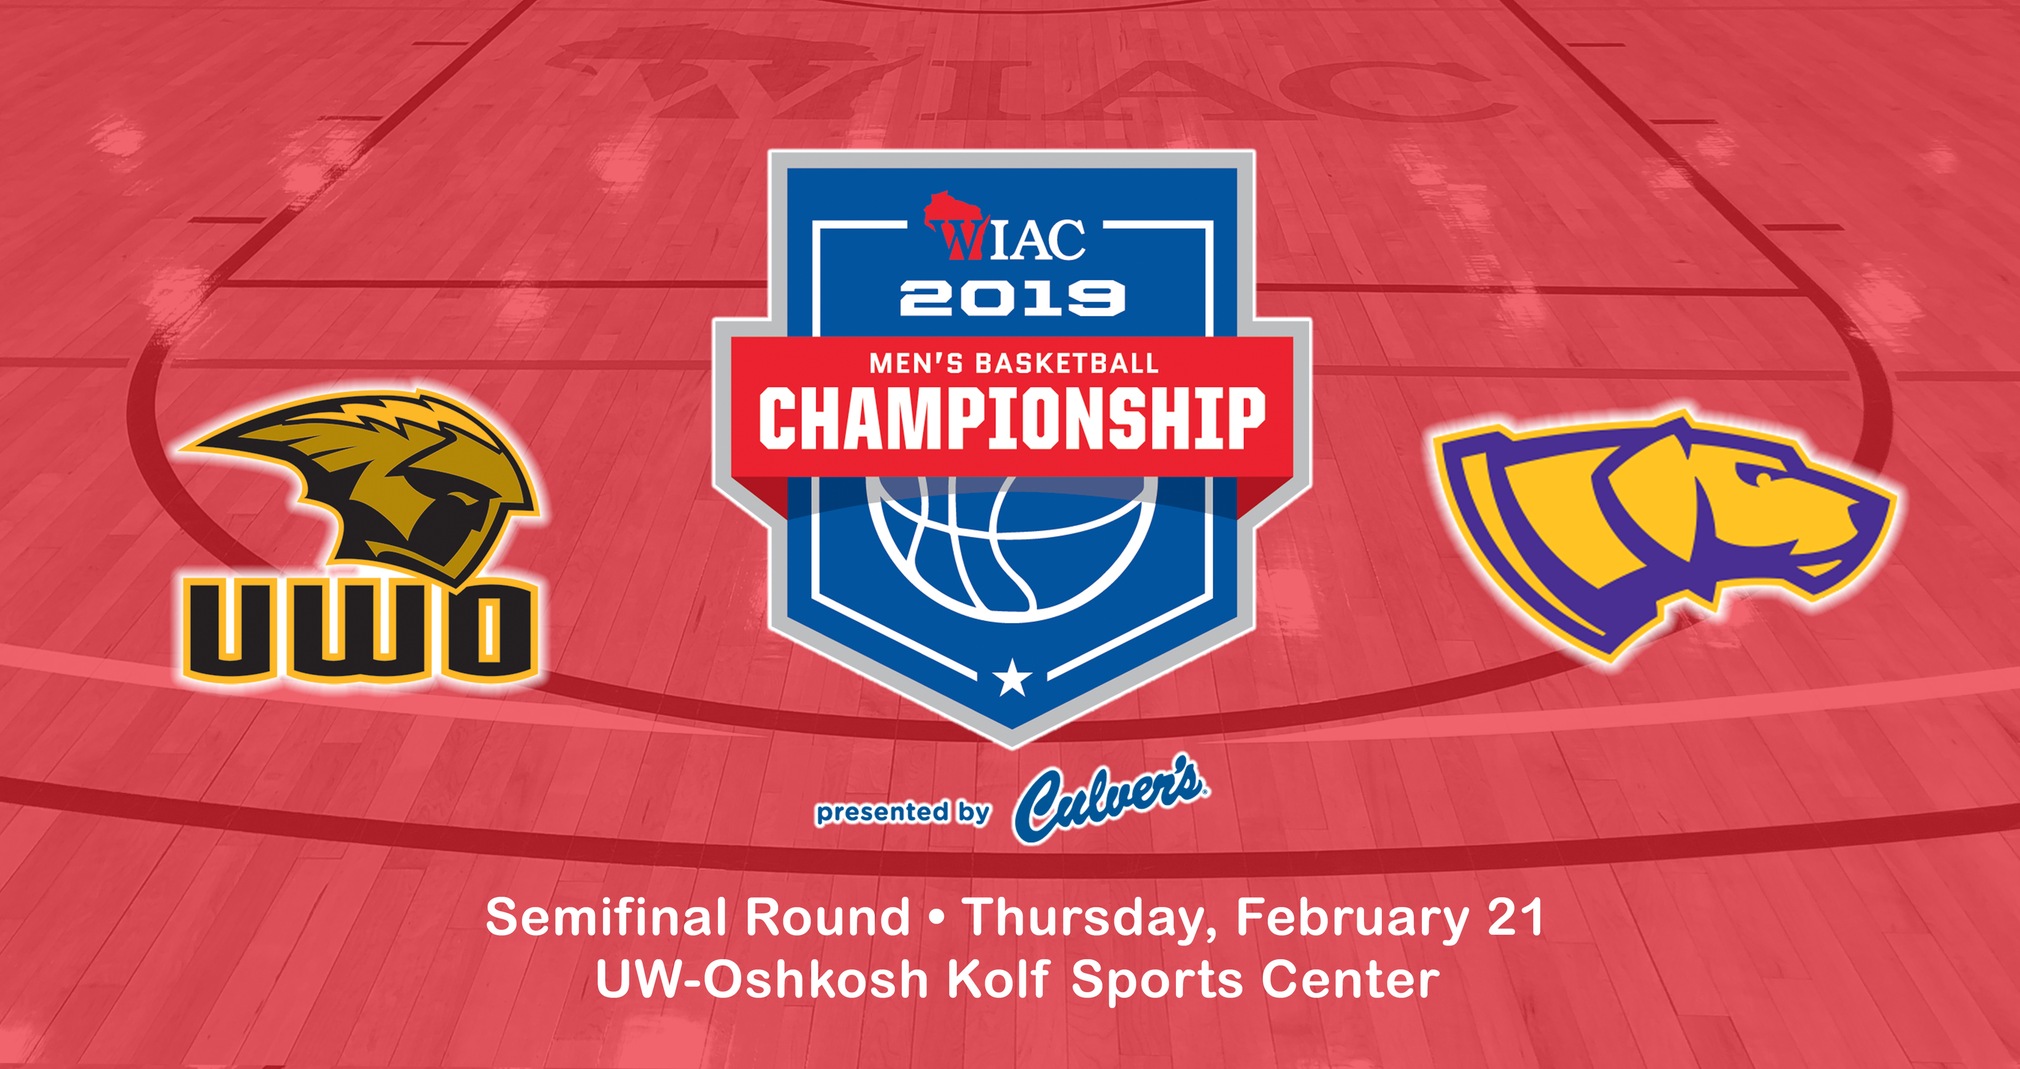 Titans To Host Pointers In WIAC Championship Semifinal